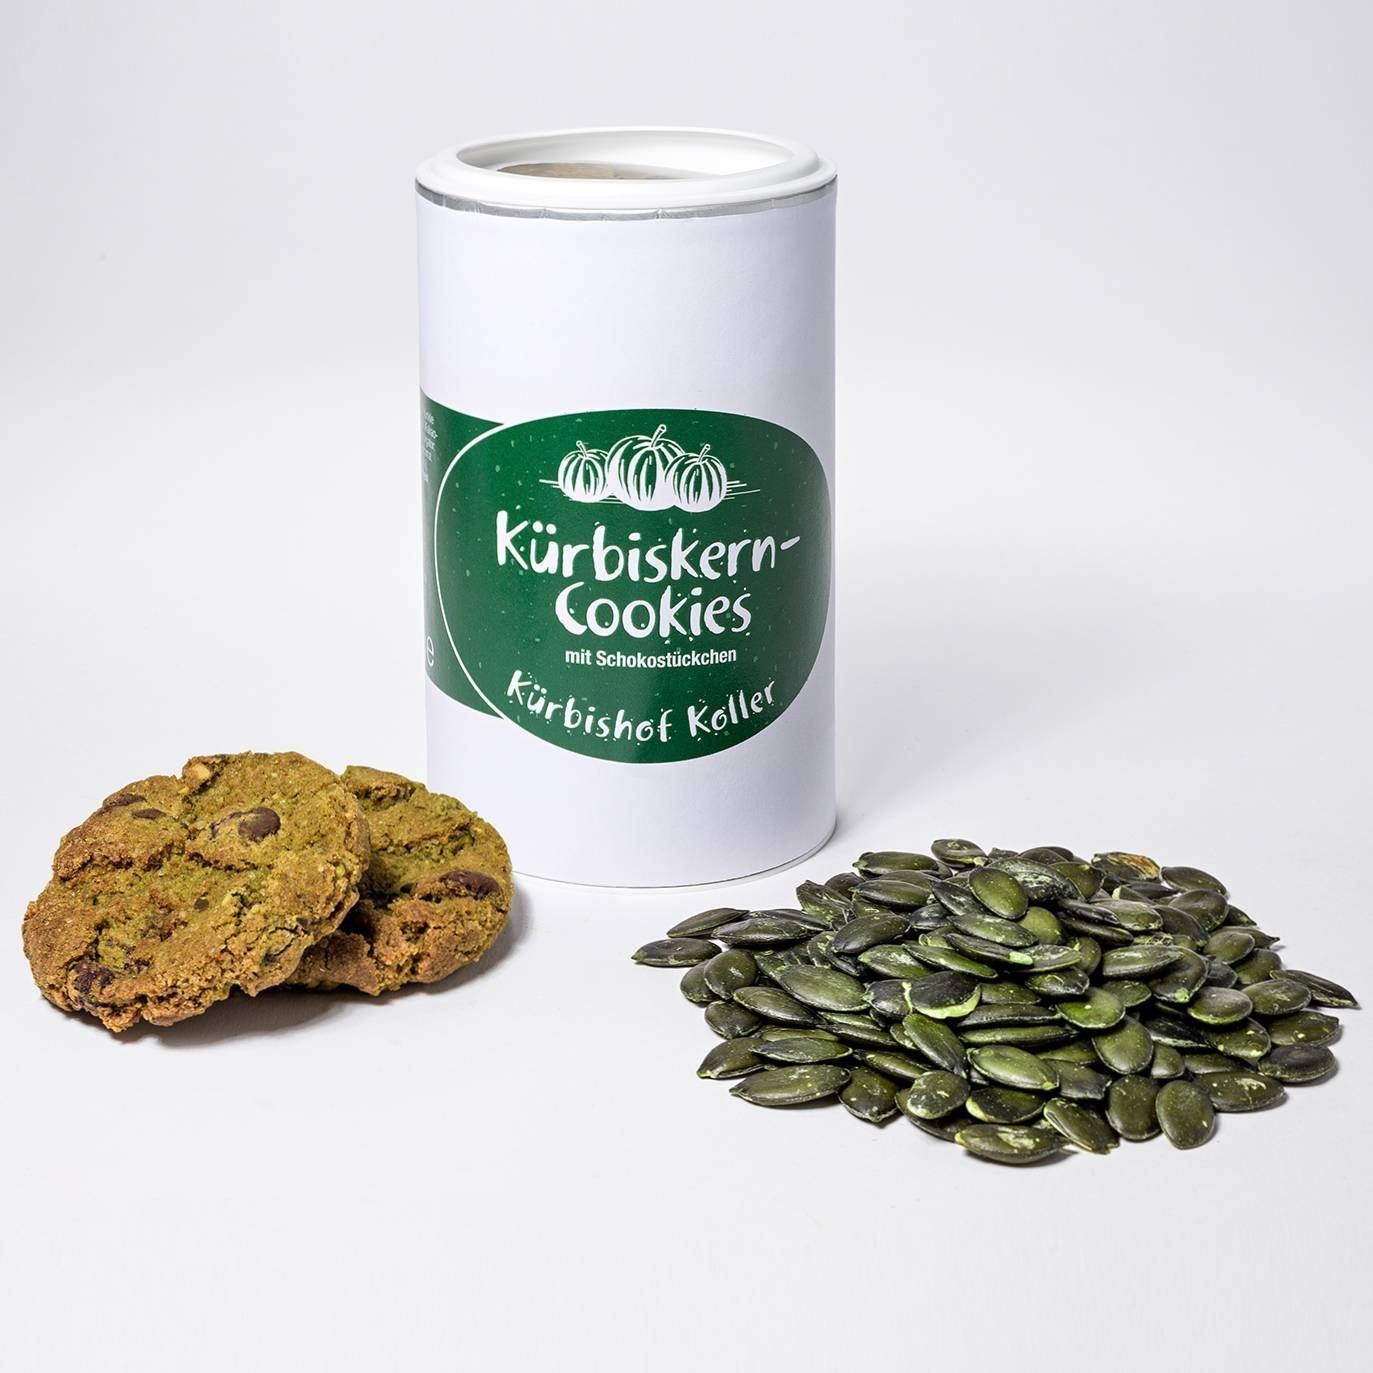 Pumpkin Seed Cookies with Chocolate Chips in Malawi